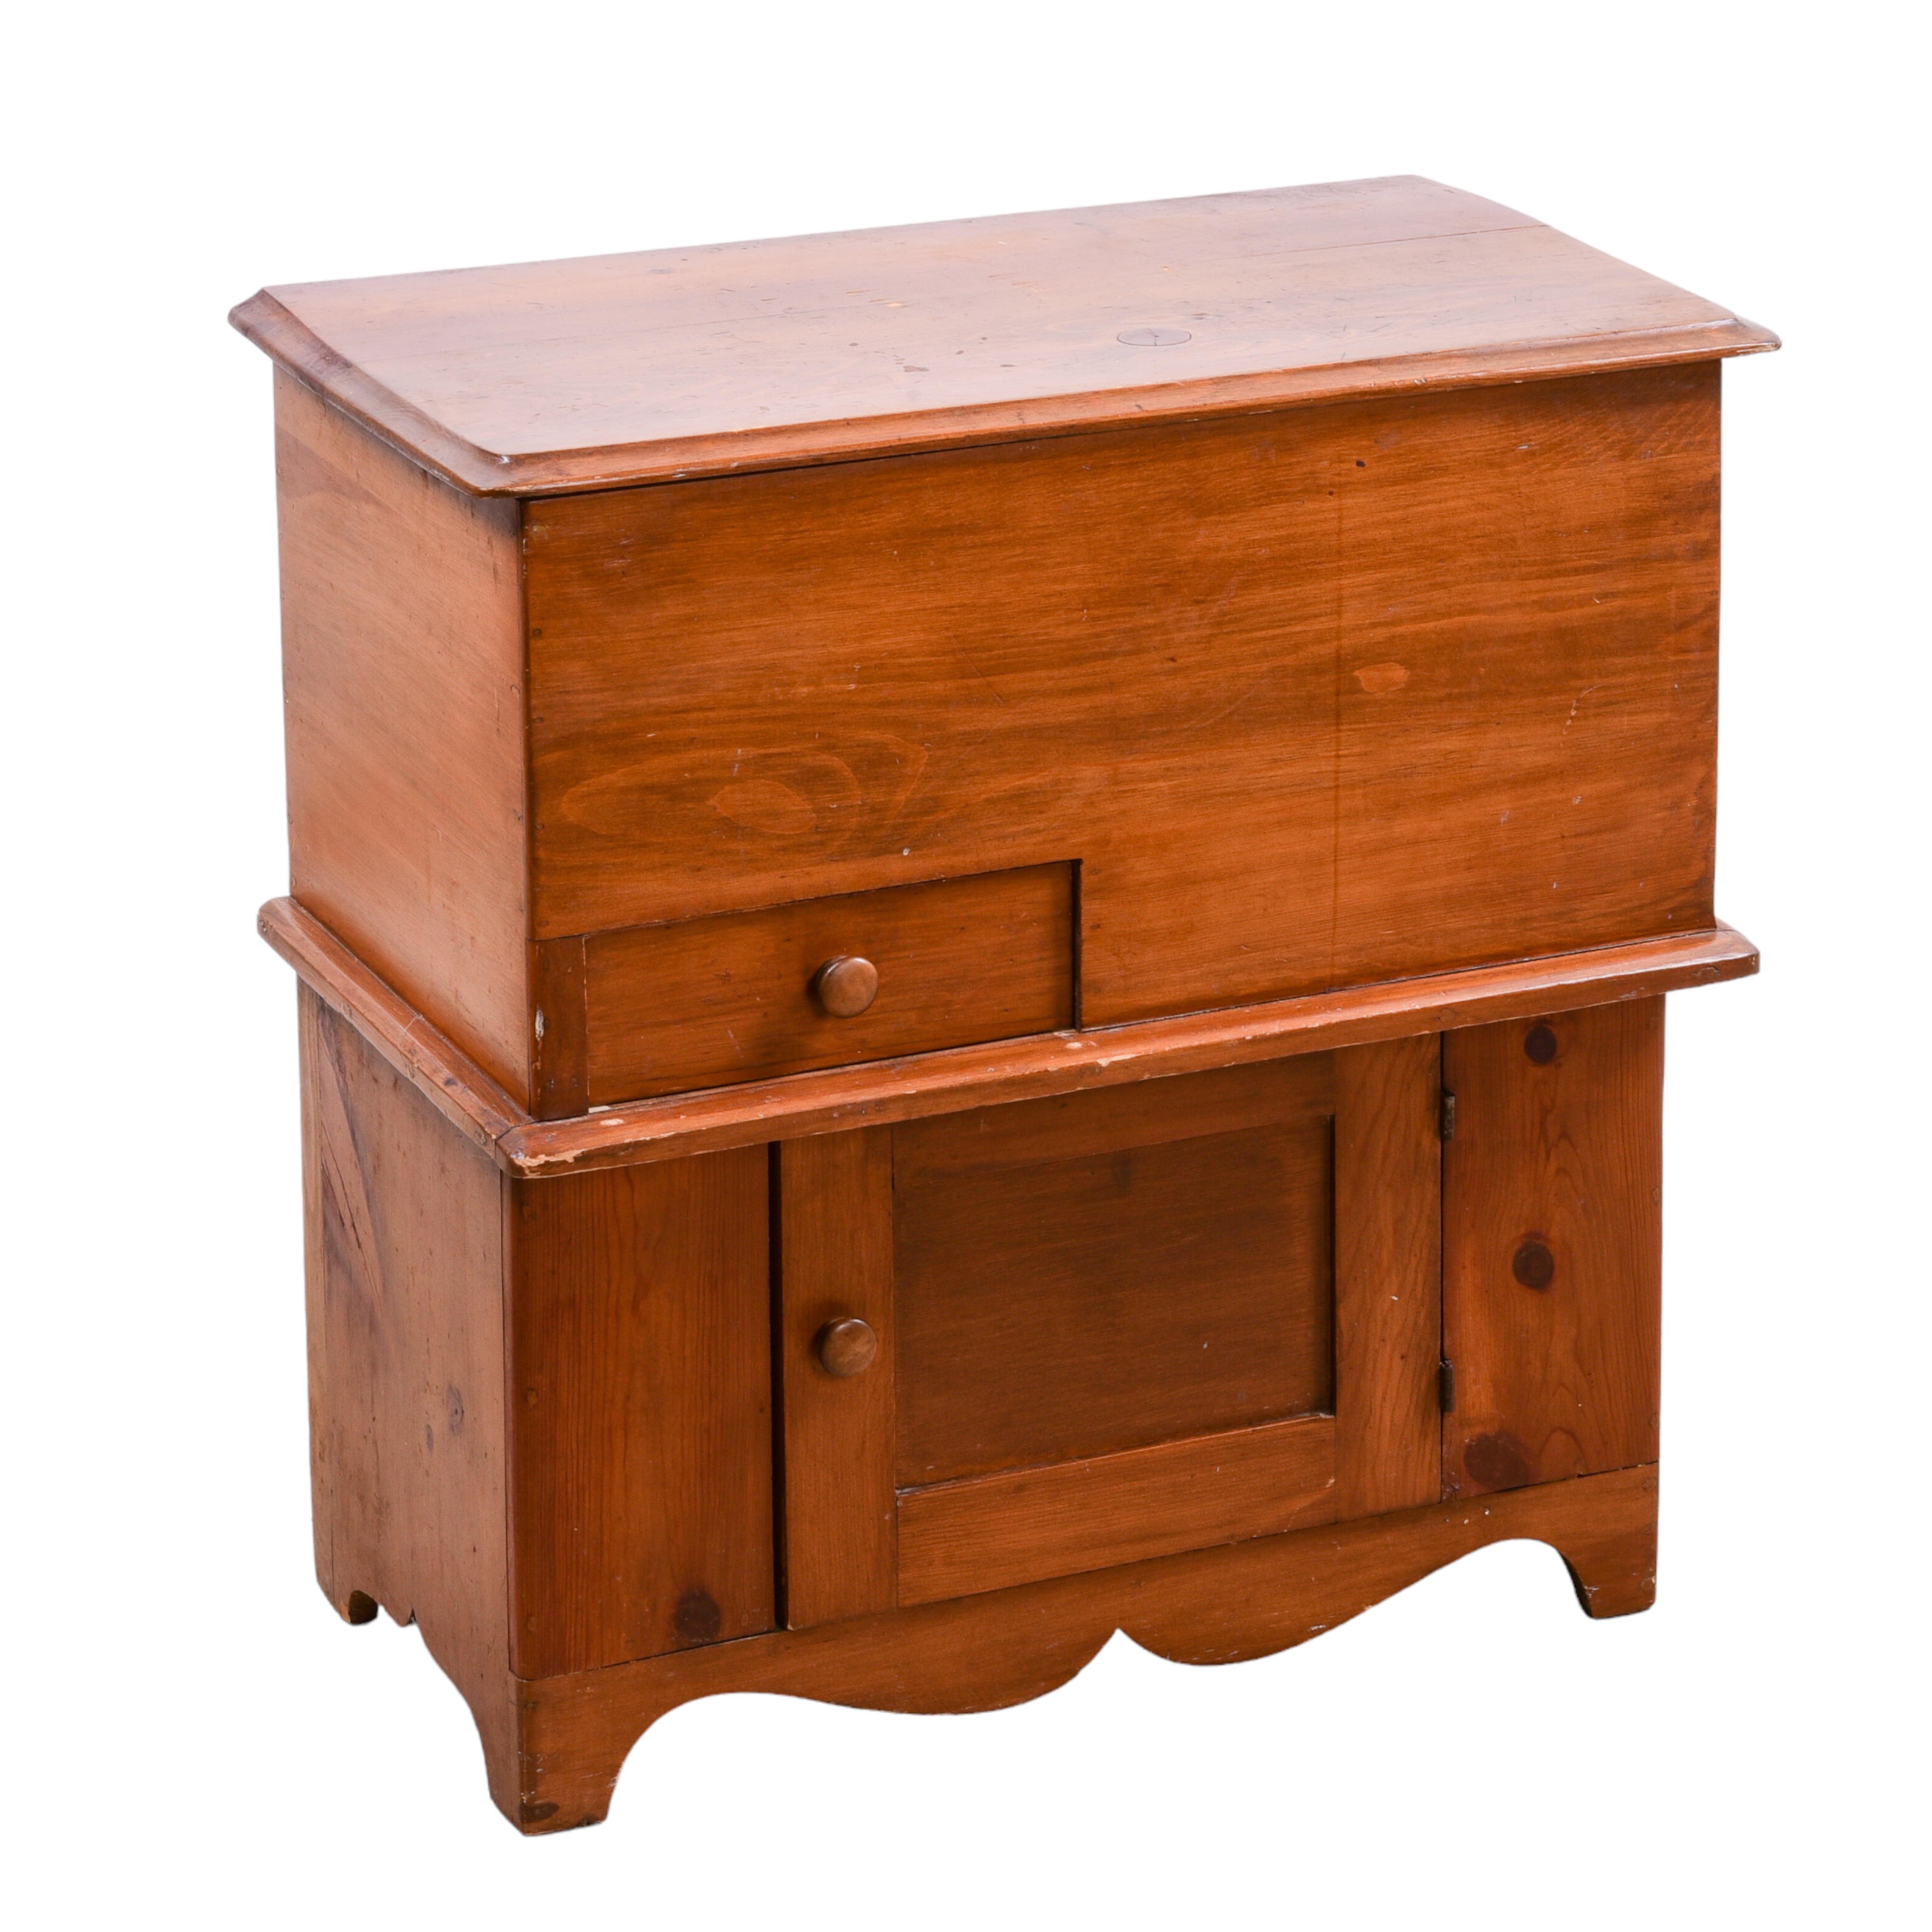 Pine chest top with lift lid with 3ca56e